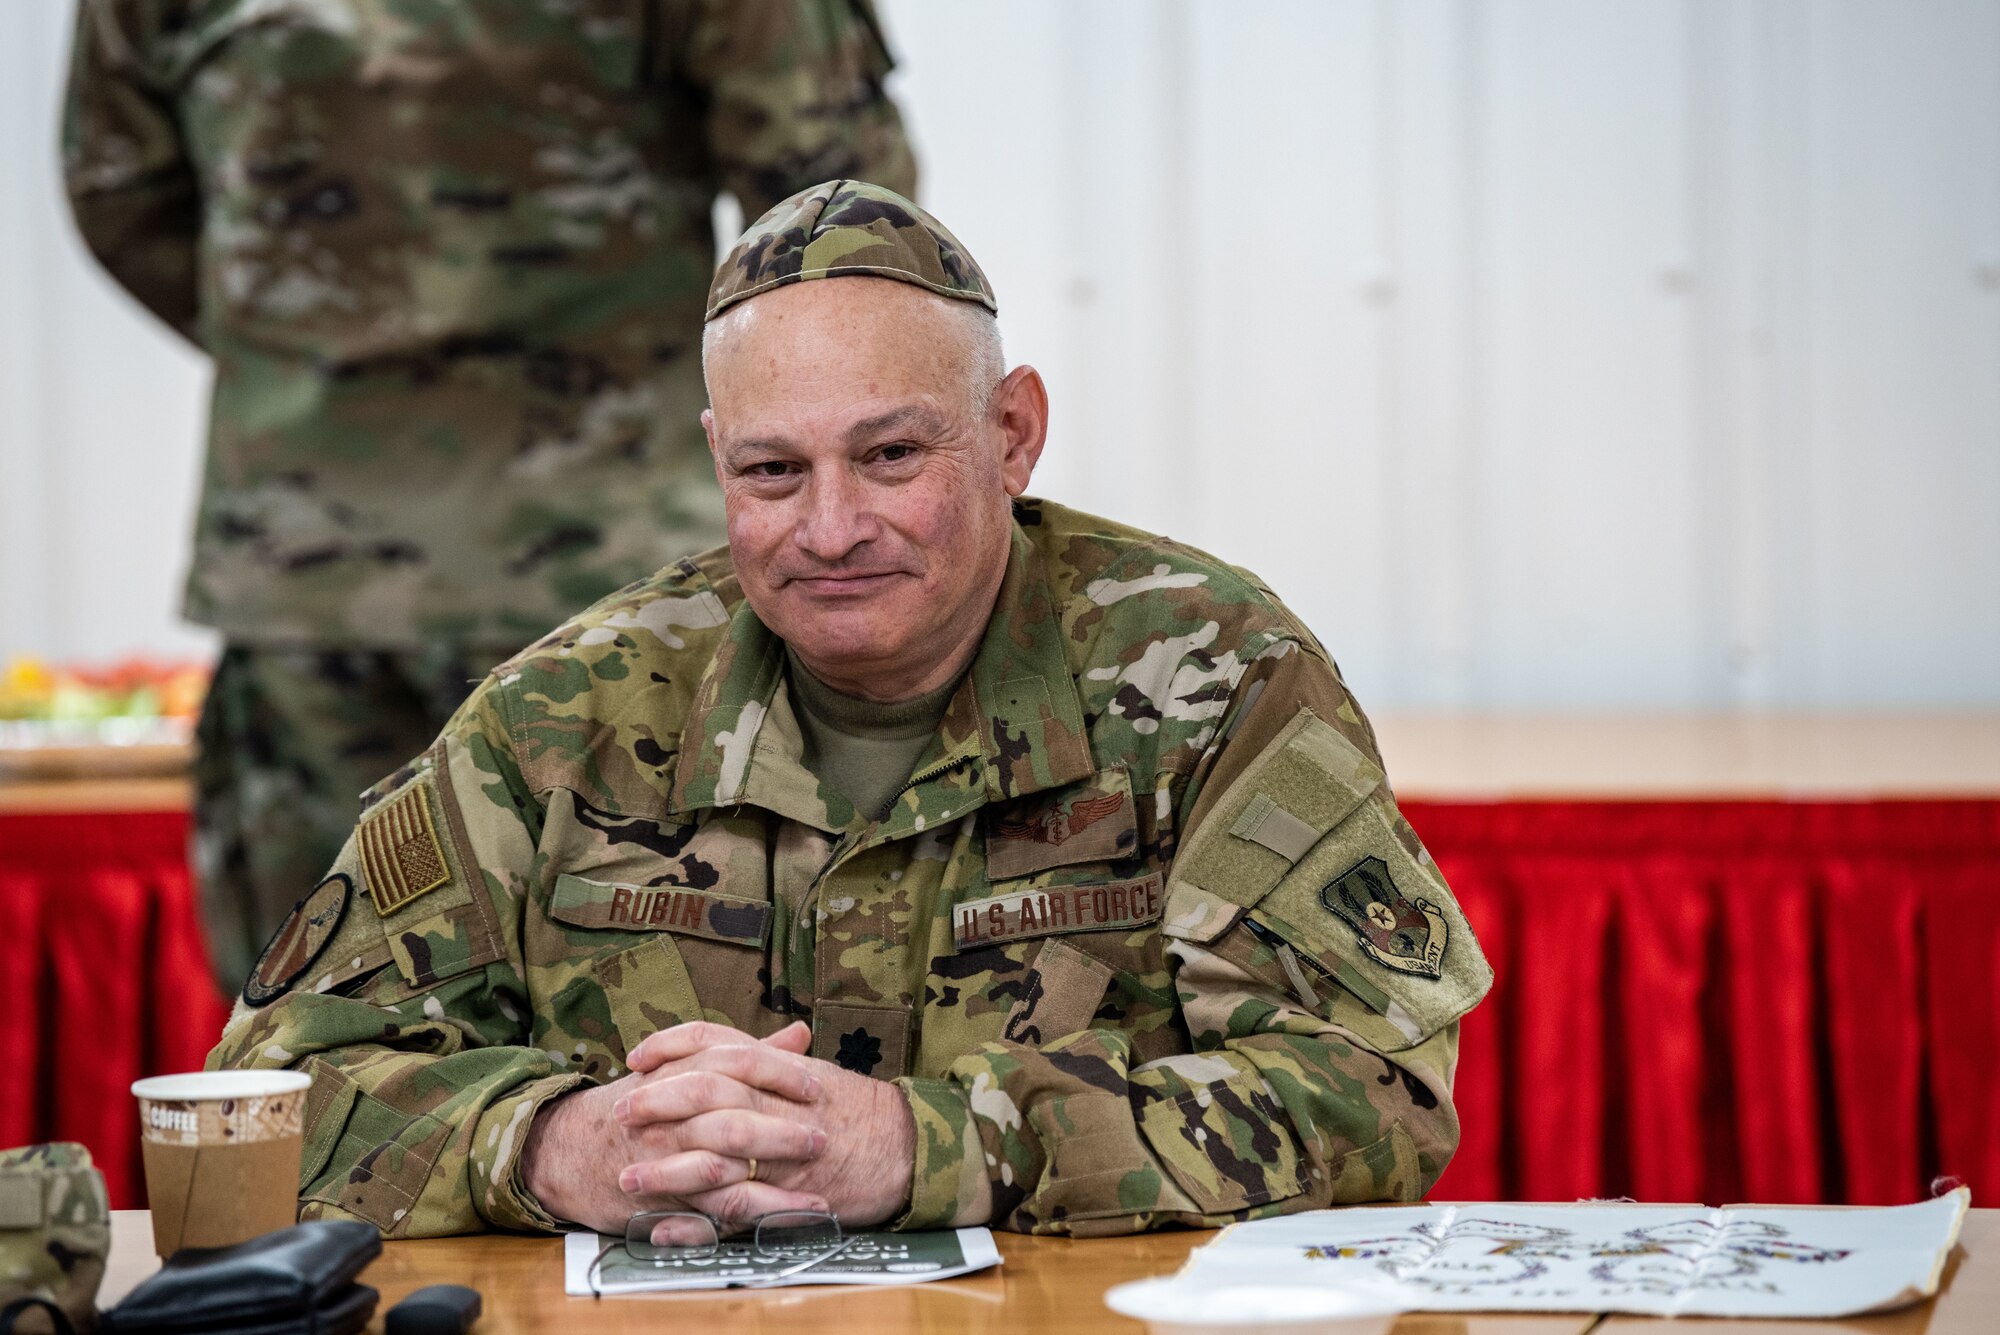 U.S. Air Force Lt. Col. Richard Rubin, 908th Expeditionary Air Refueling Squadron flight surgeon, awaits the start of a Seder to establish the commencement of Passover at Al Dhafra Air Base, United Arab Emirates, March 31, 2021.